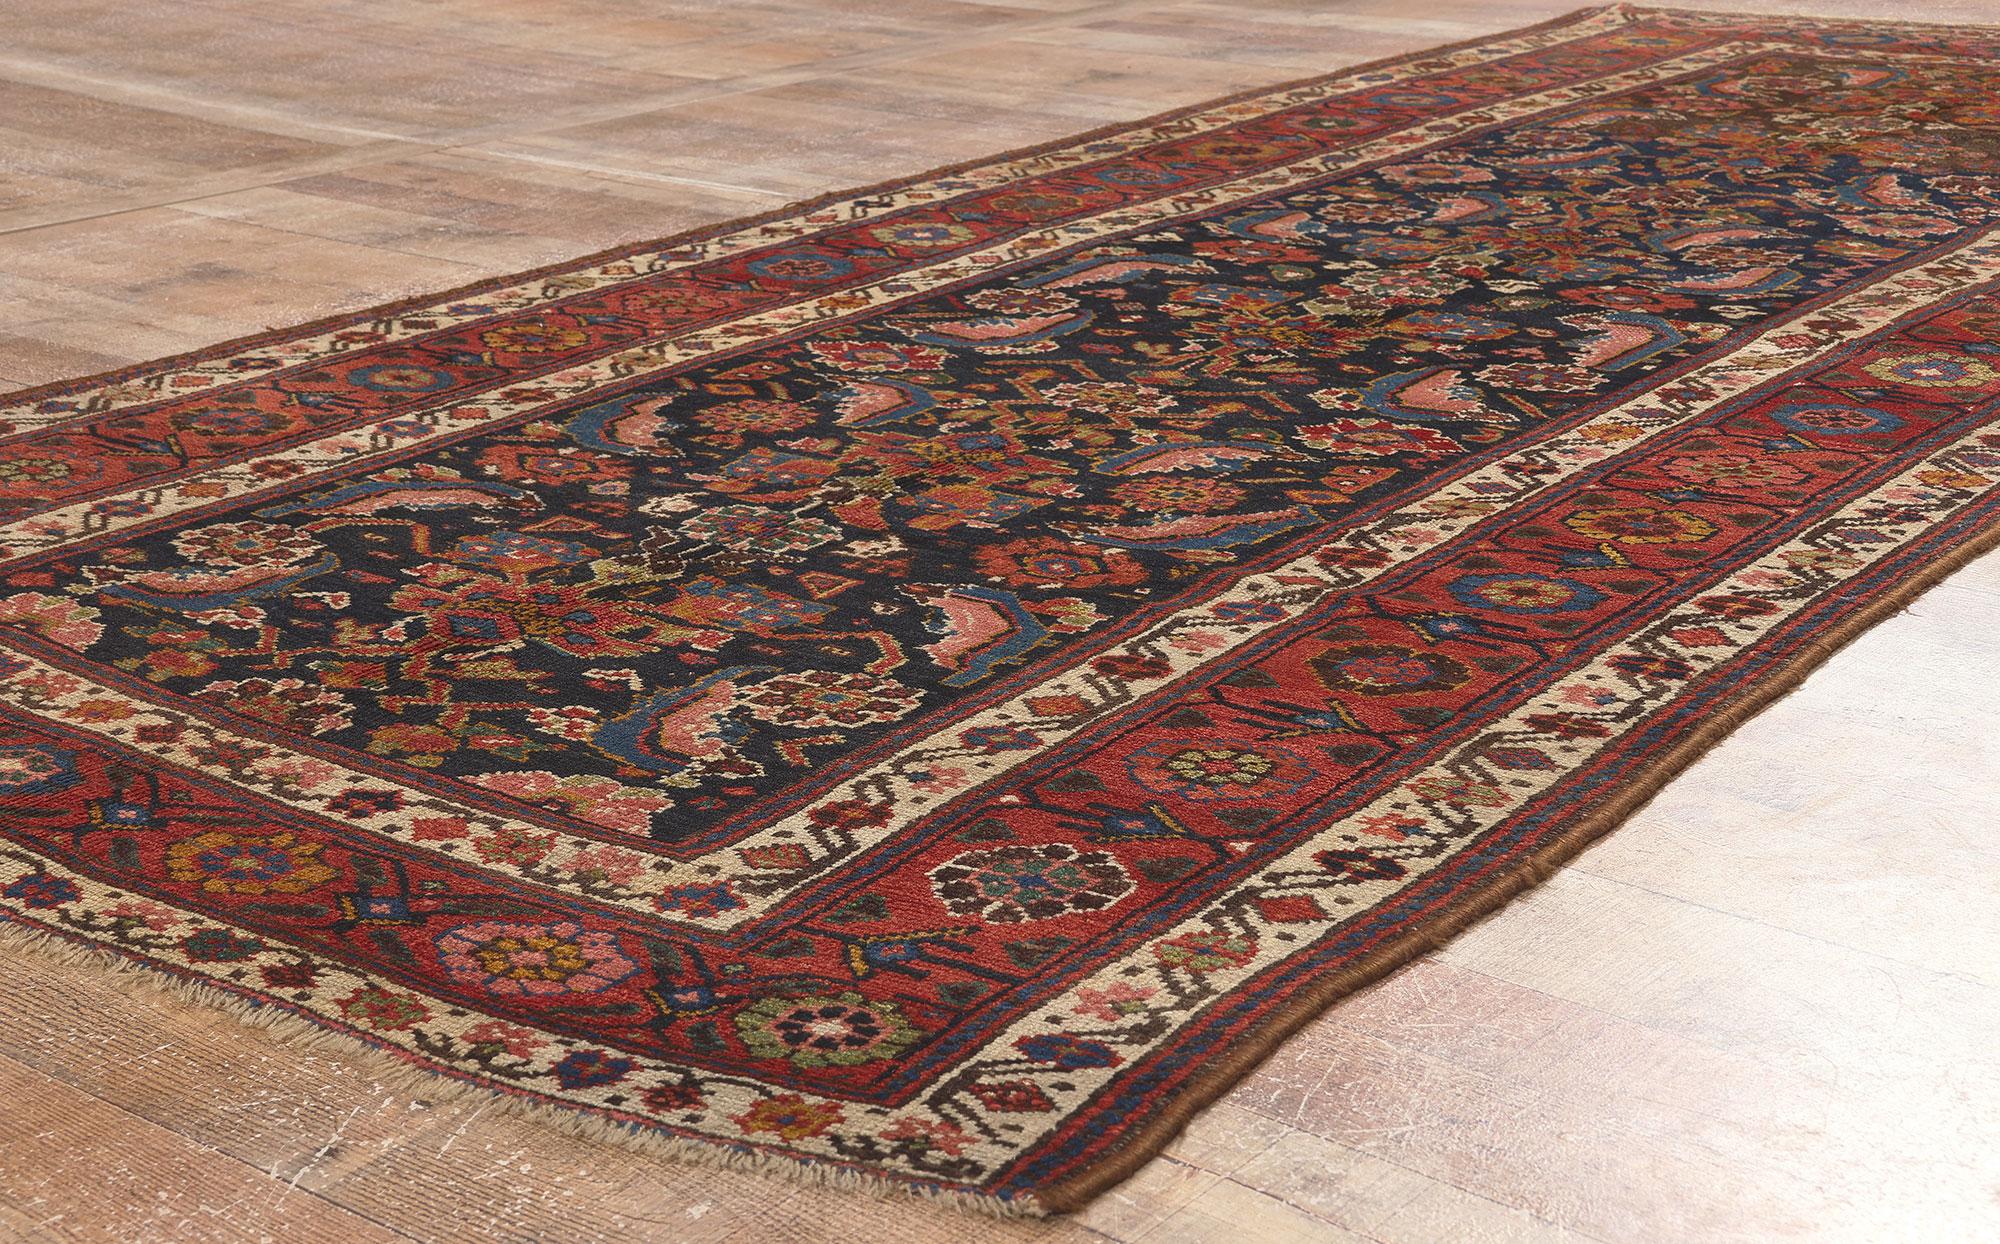 Antique Persian Kurdish Rug, Artisanal Excellence Meets Subtle Sophistication In Good Condition For Sale In Dallas, TX